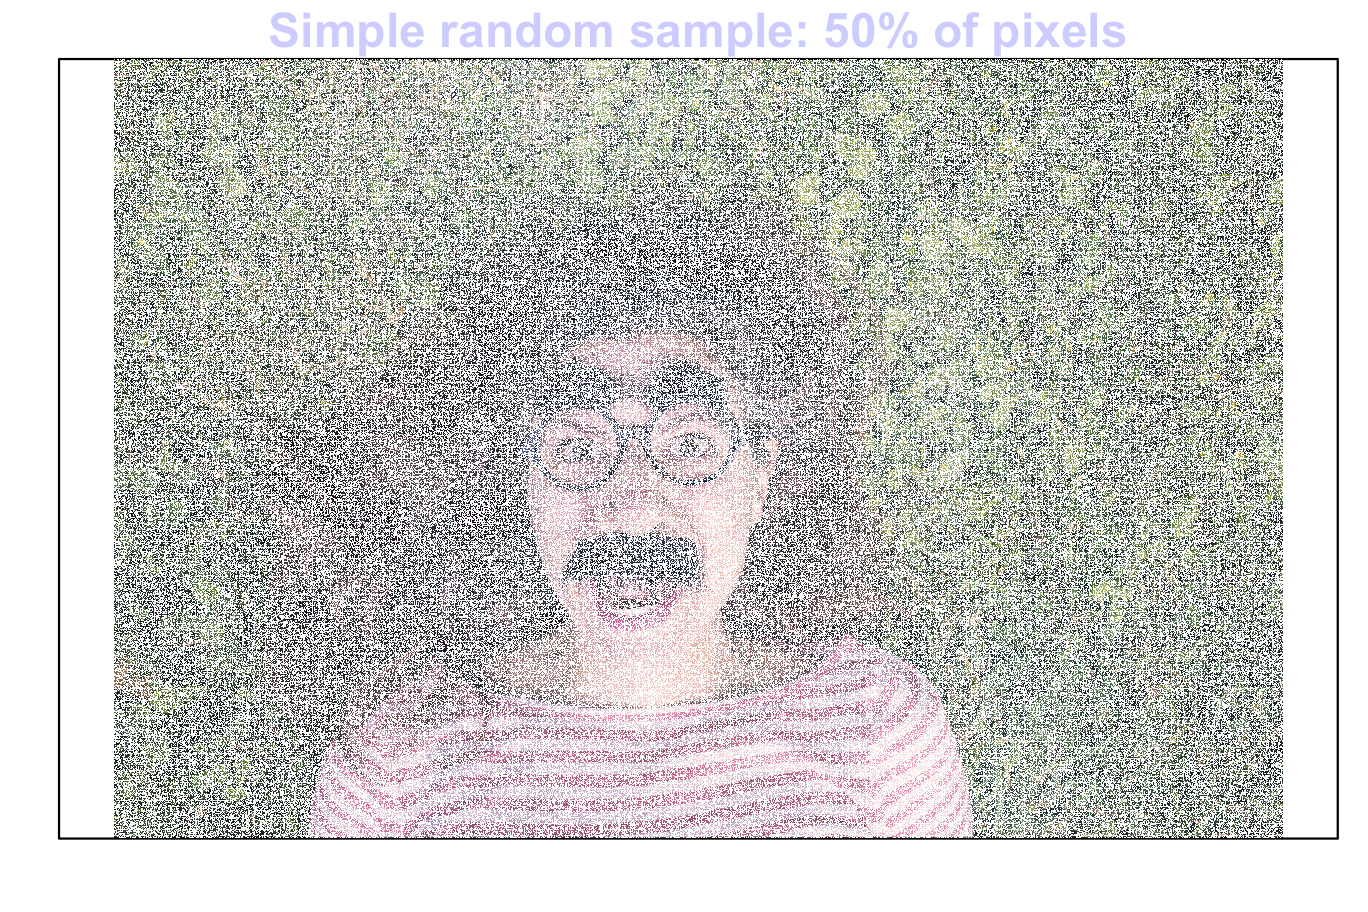 Random samples from an image: 5 percent of pixels (top left); 10 percentof pixels (top right); 25 percent of pixels (bottom left); 50 percent of pixels (bottom right)